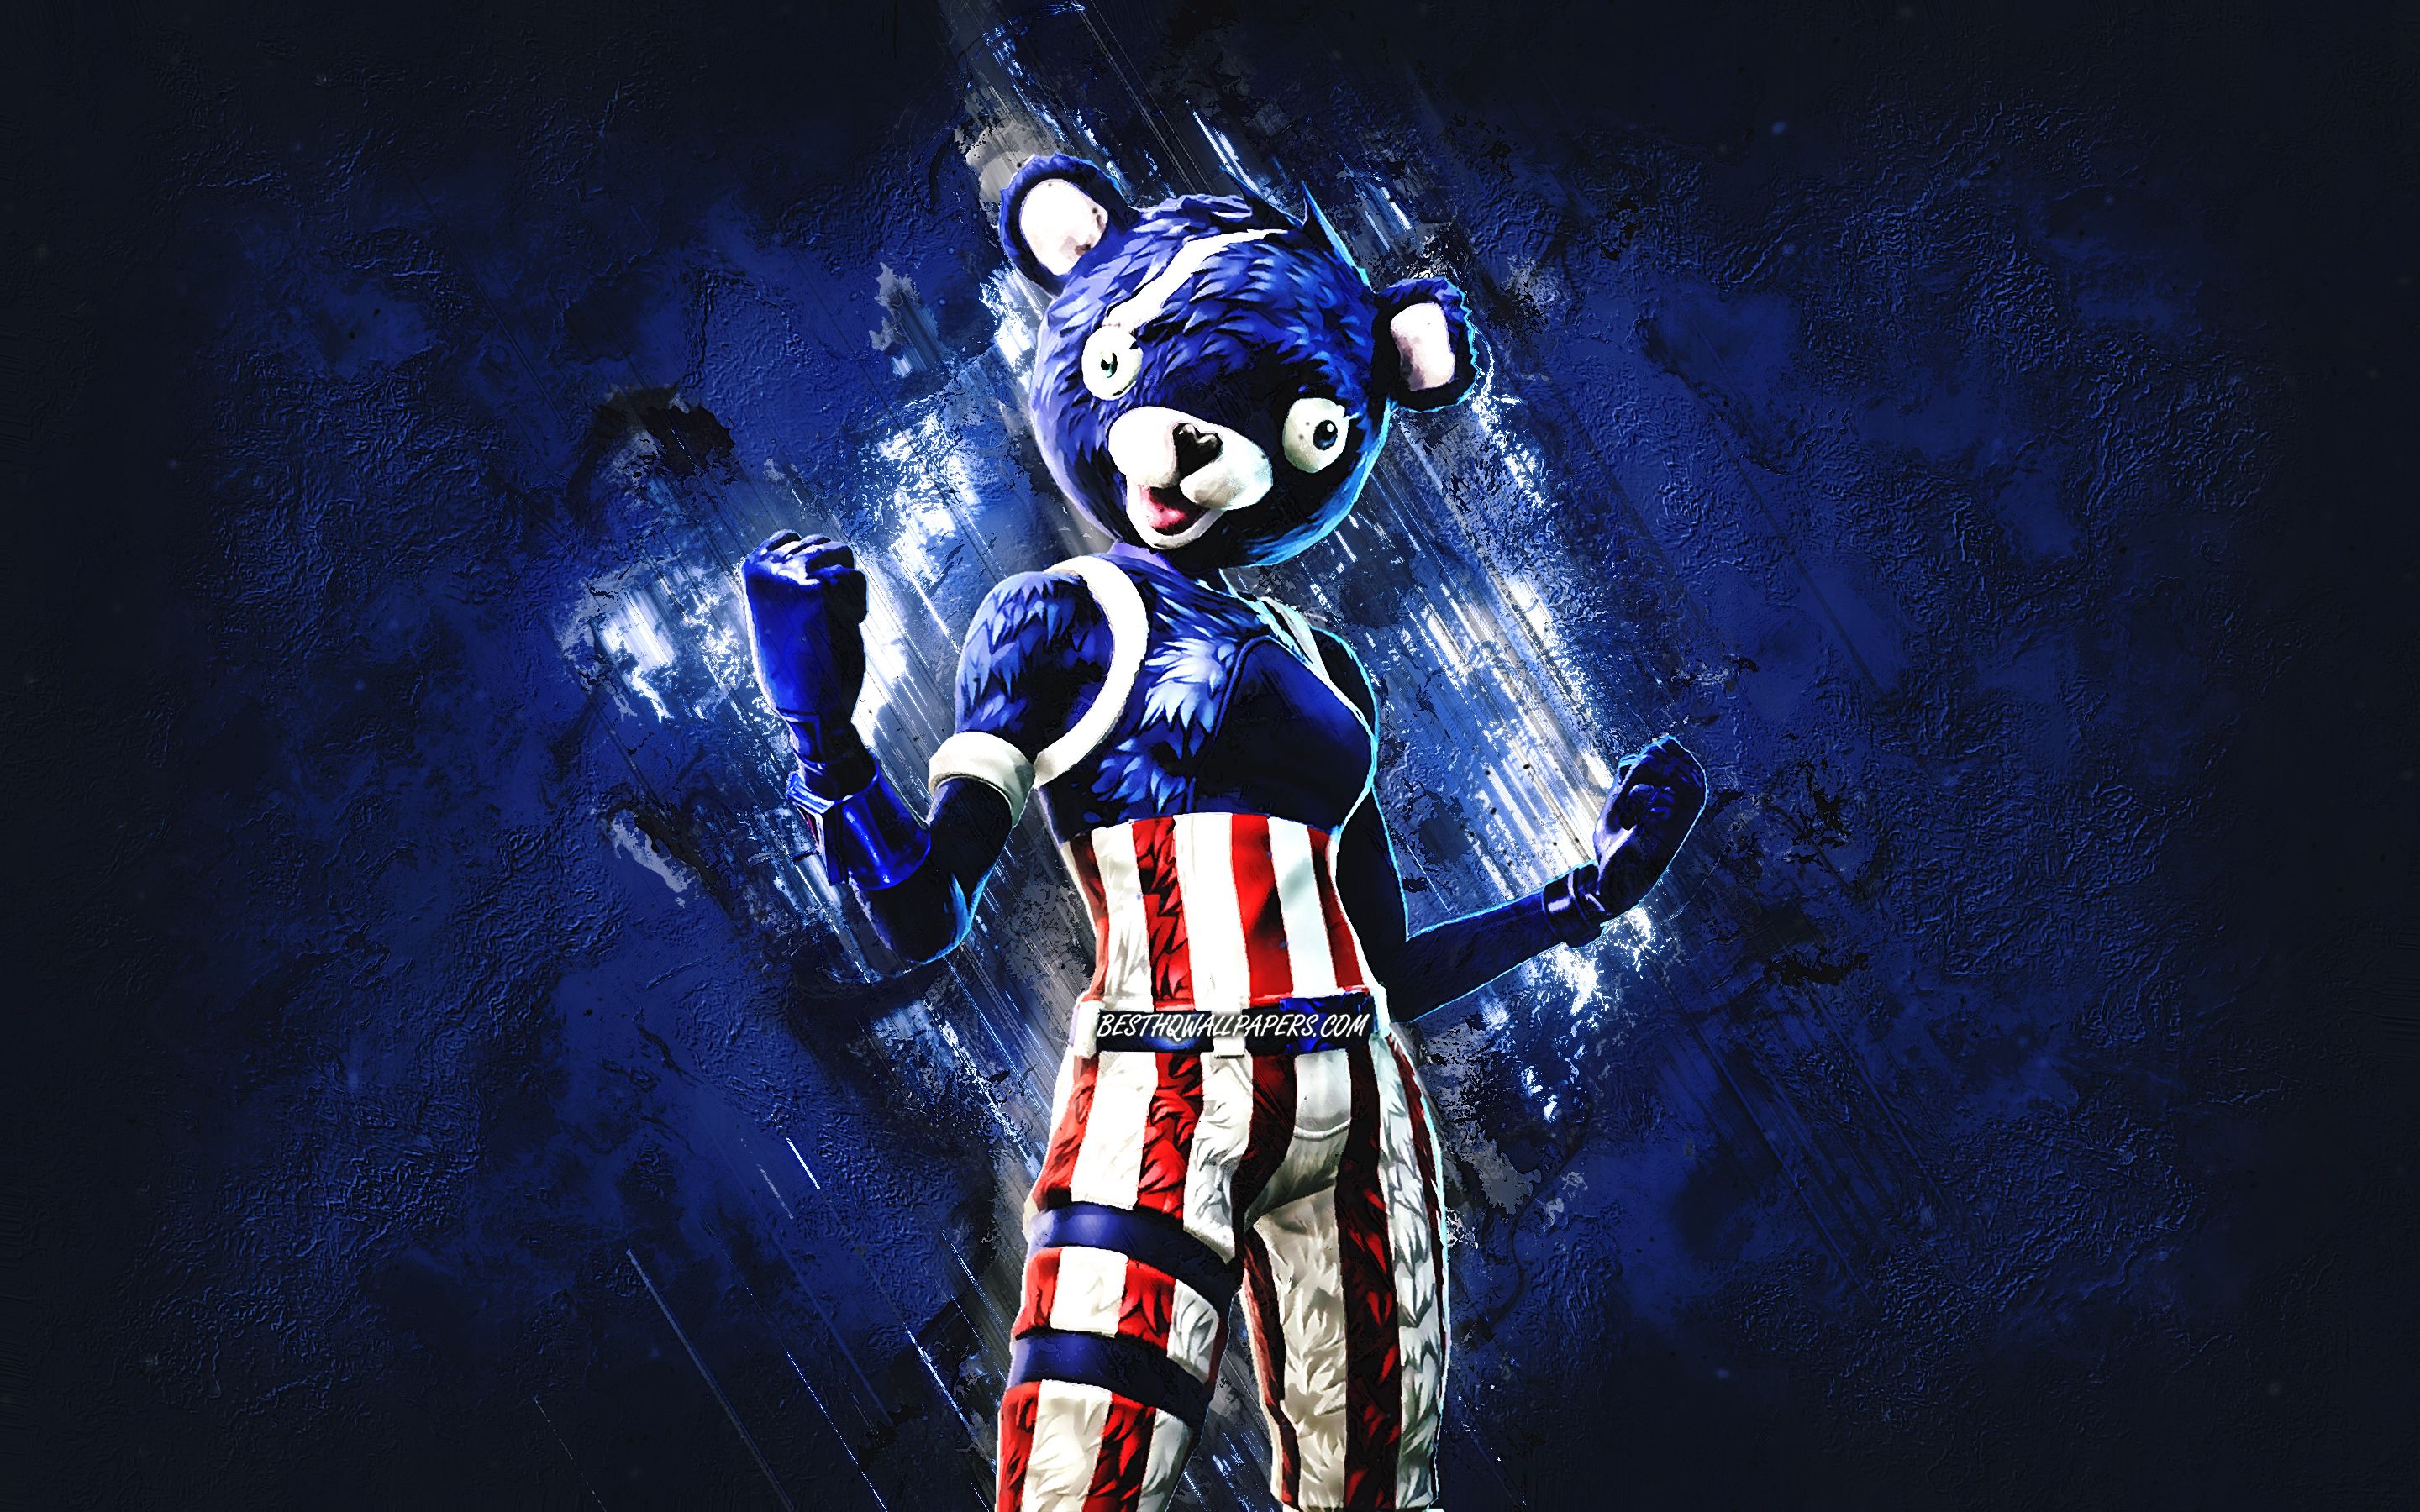 Download wallpaper Fortnite Fireworks Team Leader Skin, Fortnite, main characters, blue stone background, Fireworks Team Leader Skin, Fireworks Team Leader Fortnite, 4th of july bear fortnite for desktop with resolution 2880x1800. High